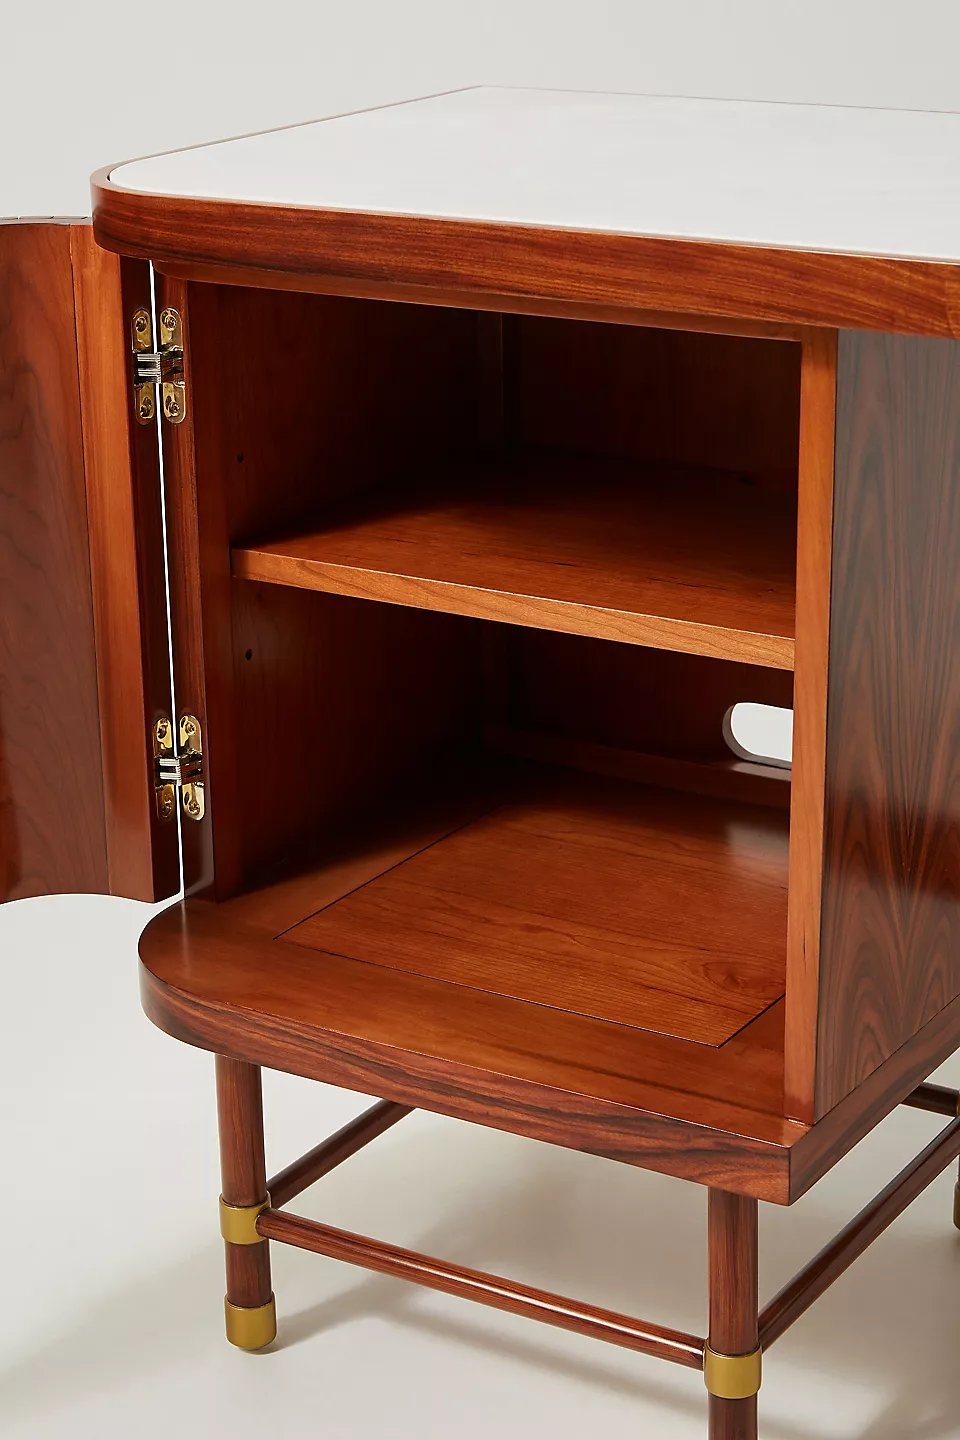 Deluxe Tamboured Desk By Tracey Boyd in Brown - Image 3